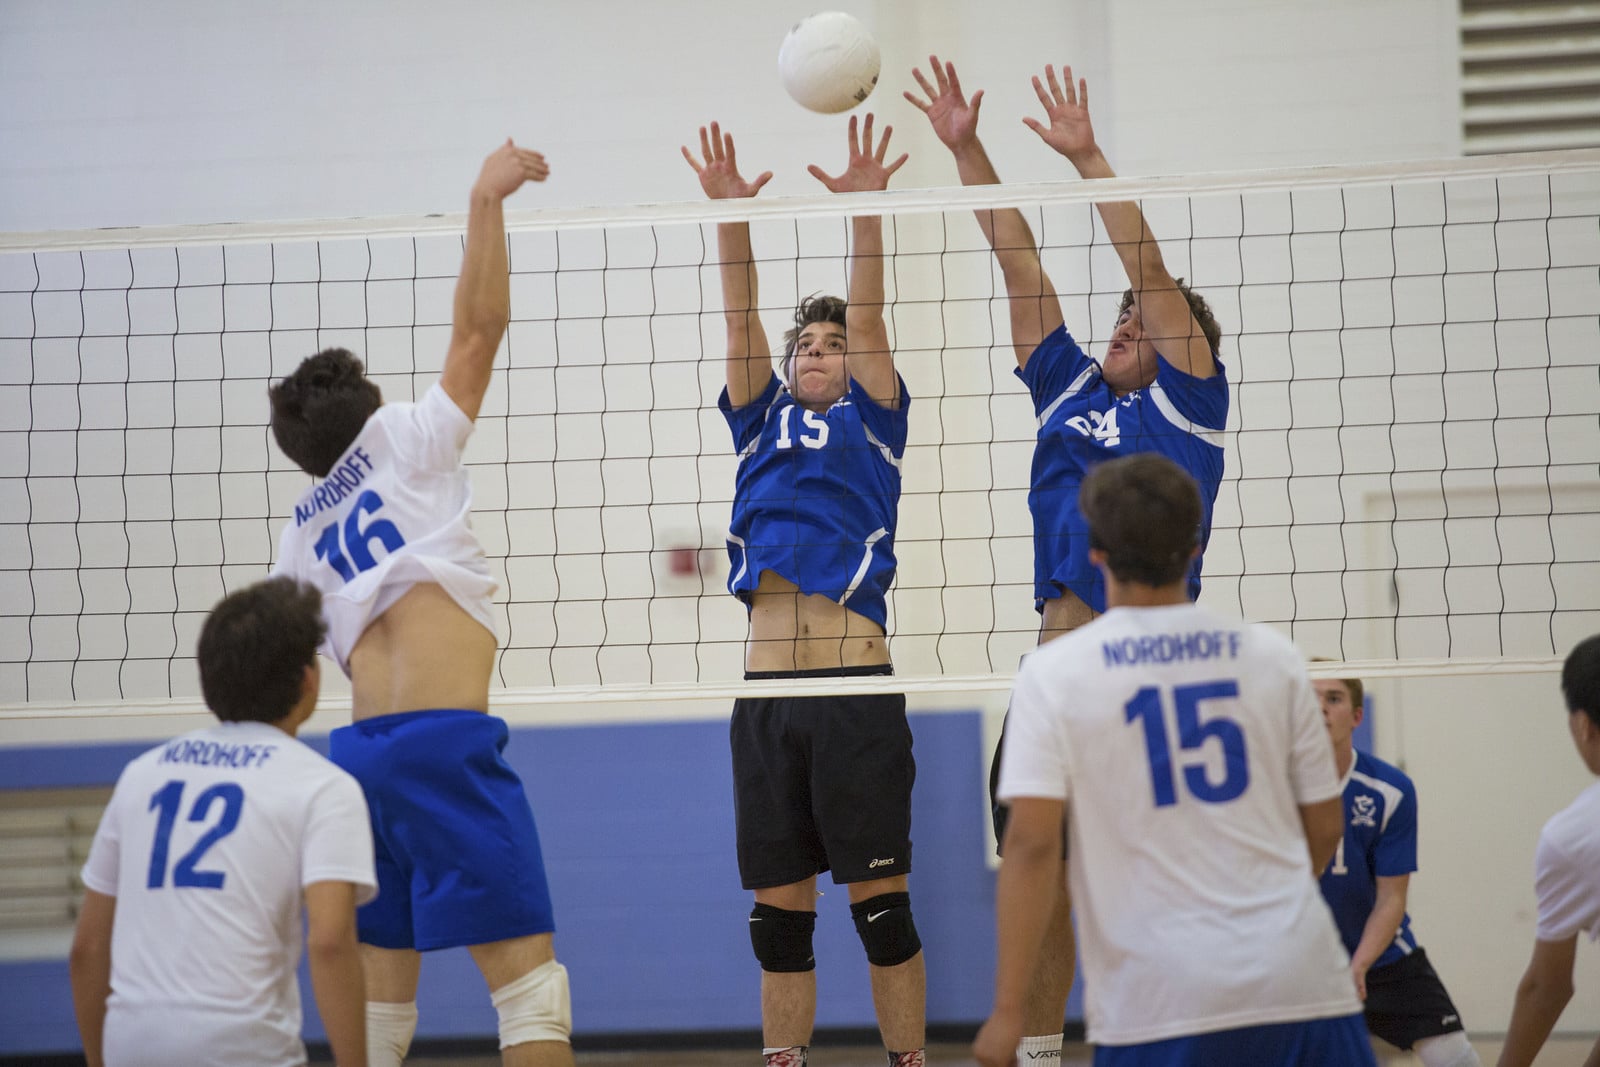 Boys Volleyball - Cate School